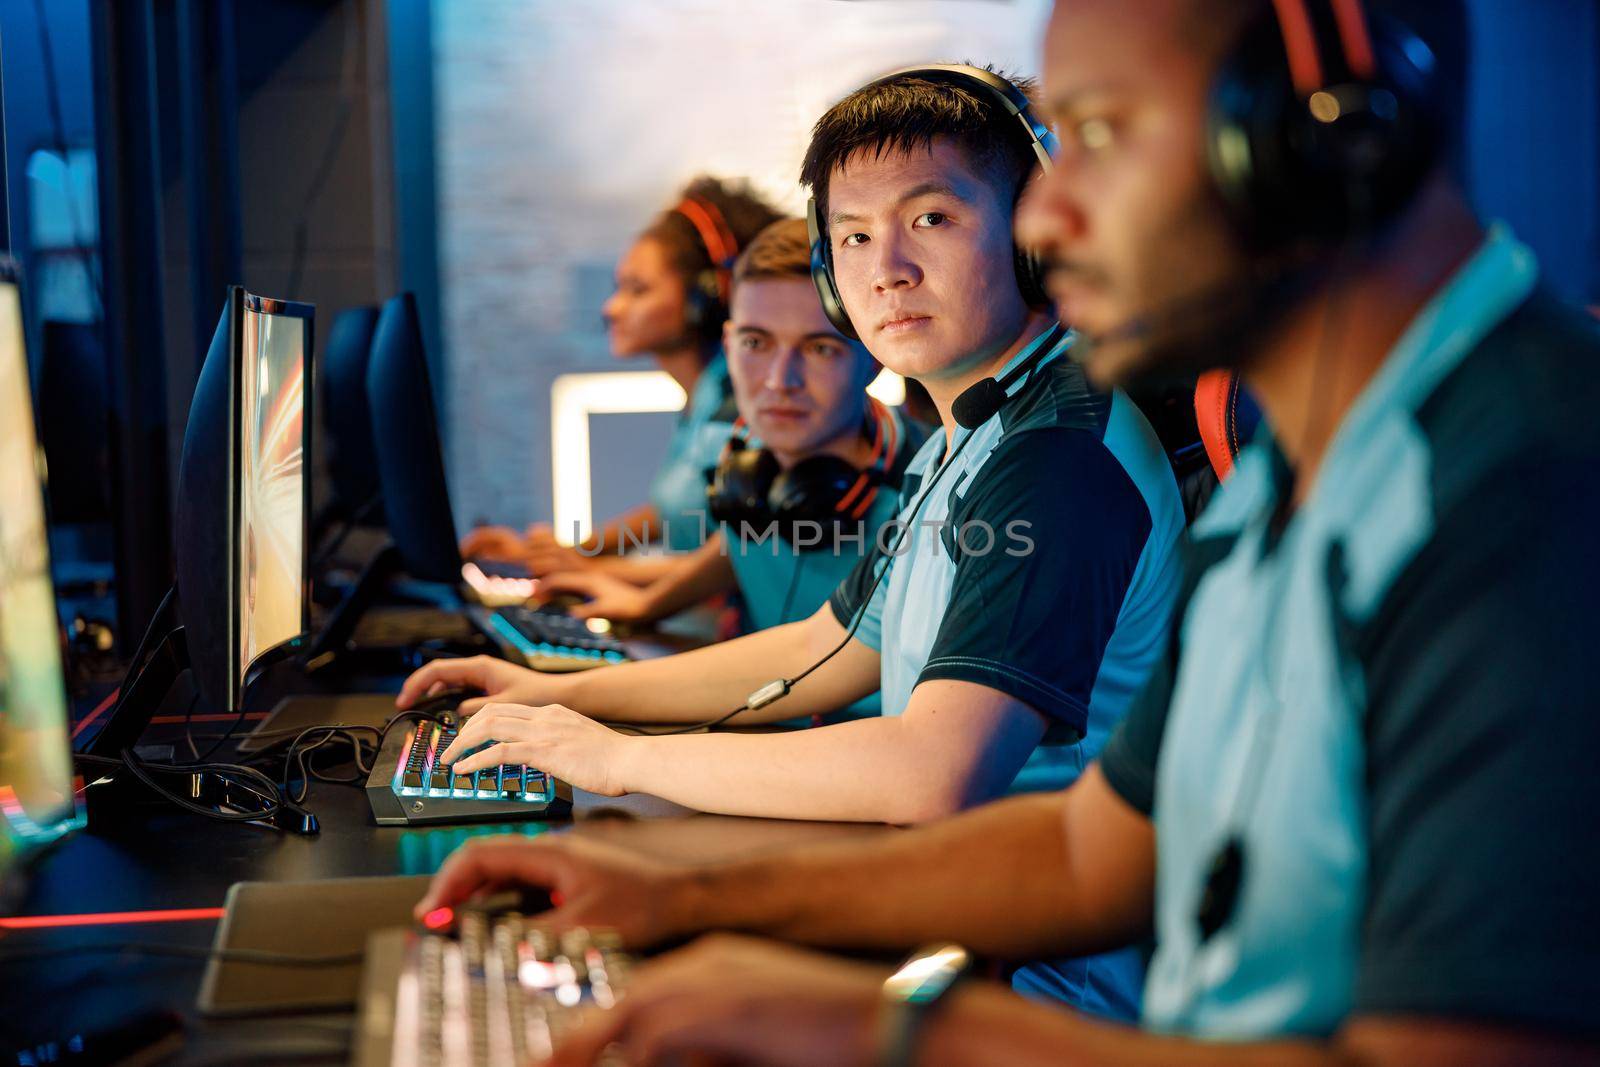 Asian professional cybersport gamer looking at camera with serious facial expression while participating in esports tournament in computer club